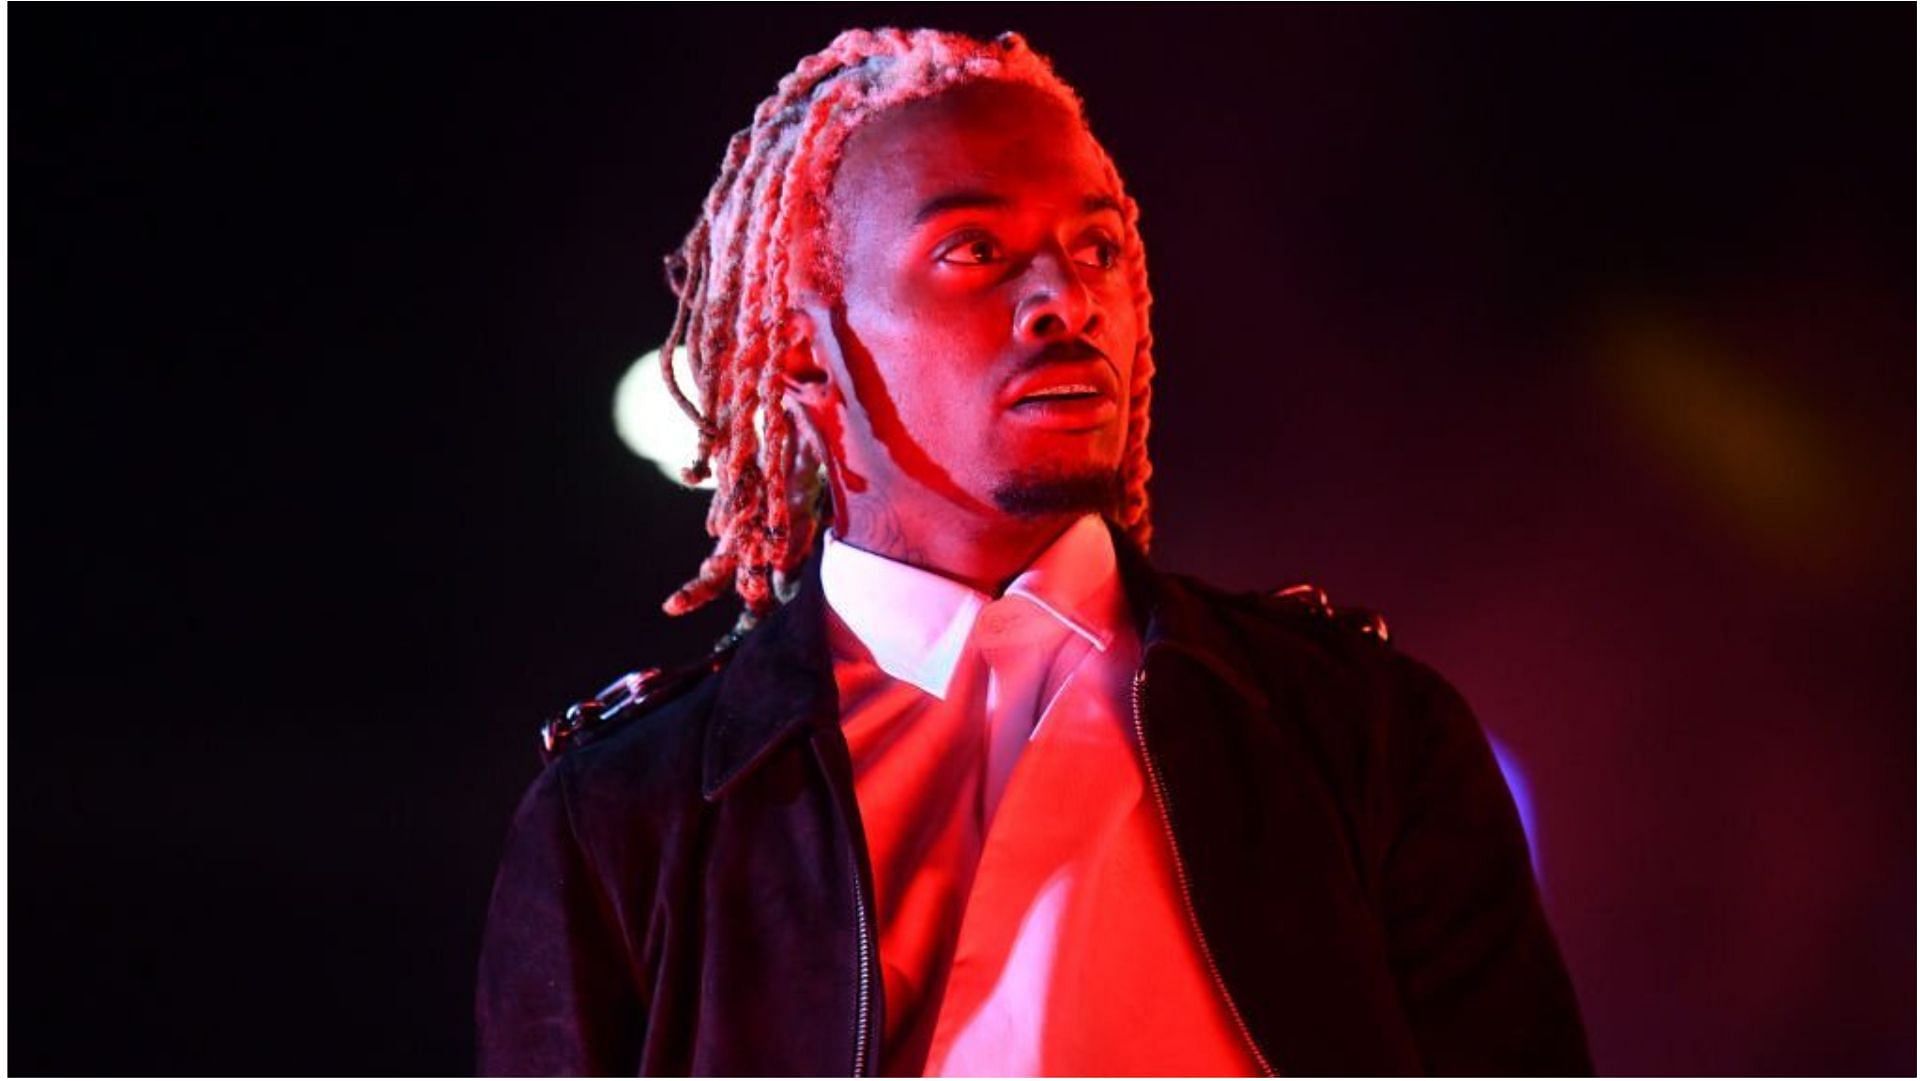 Playboi Carti had another confrontation with the law and order in the past (Image via Scott Dudelson/Getty Images)